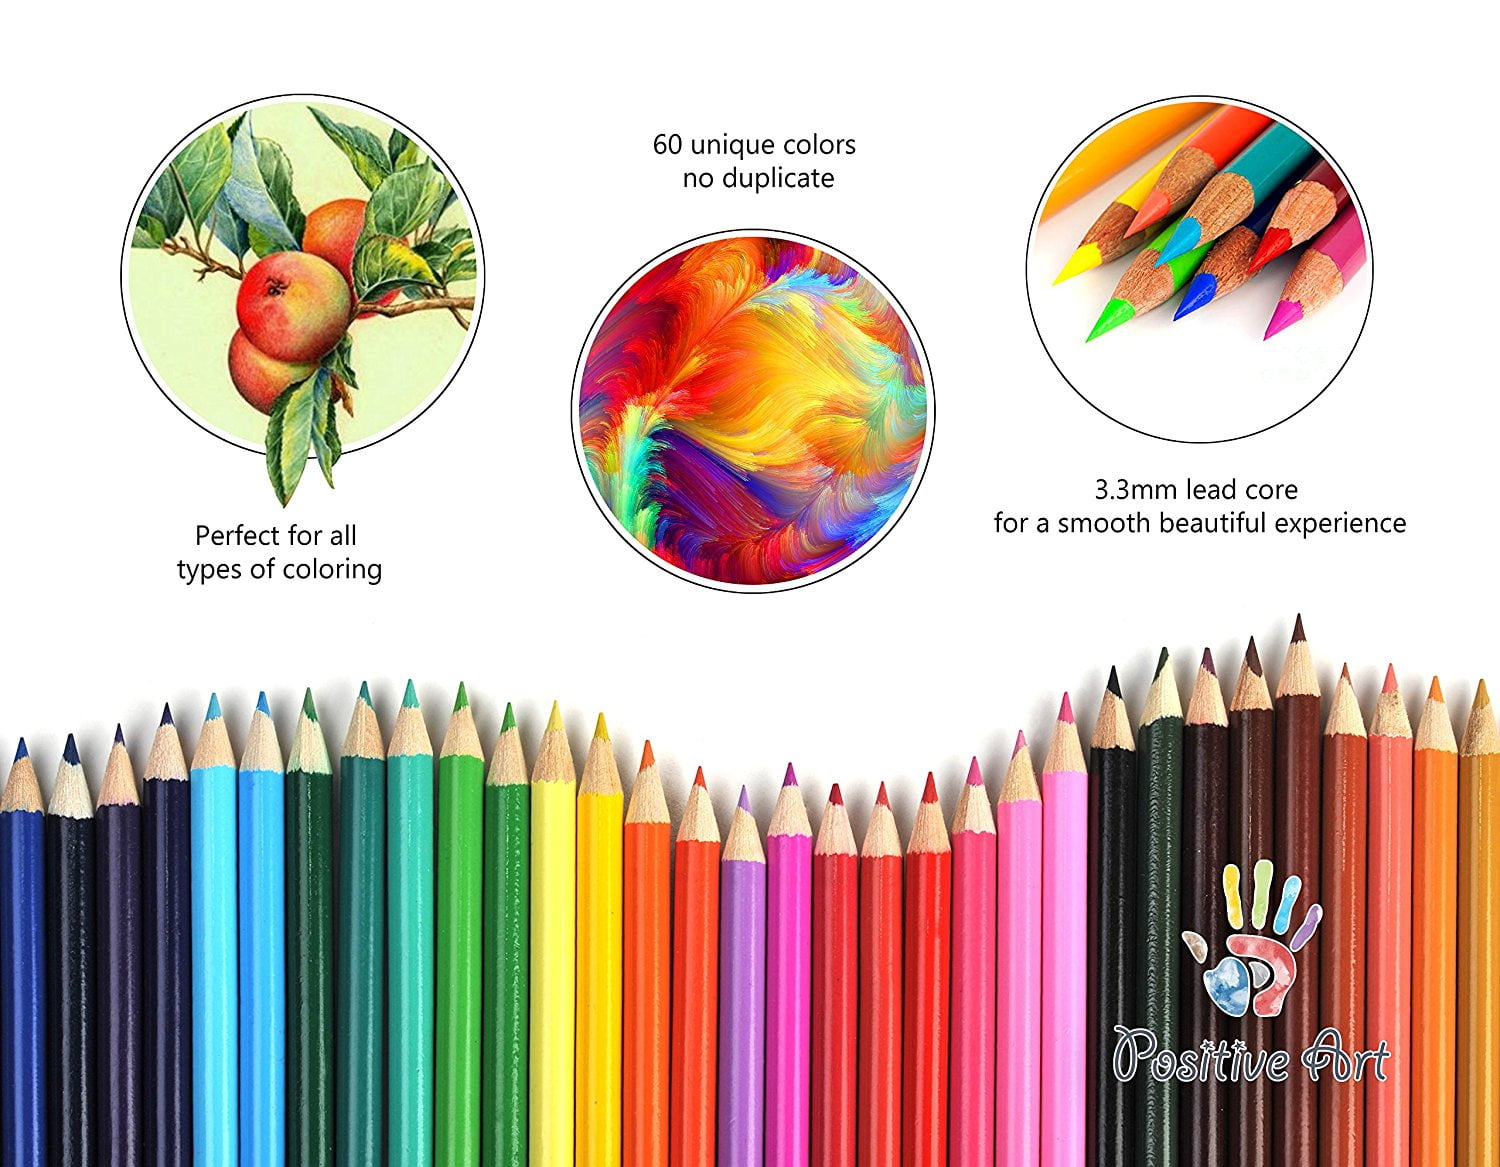 60 Pcs Pencils Pre Sharpened Checking Pencils with Eraser Erasable Colored  Pencils for Map Coloring Tests Sketch School Office Editing Kids Adults